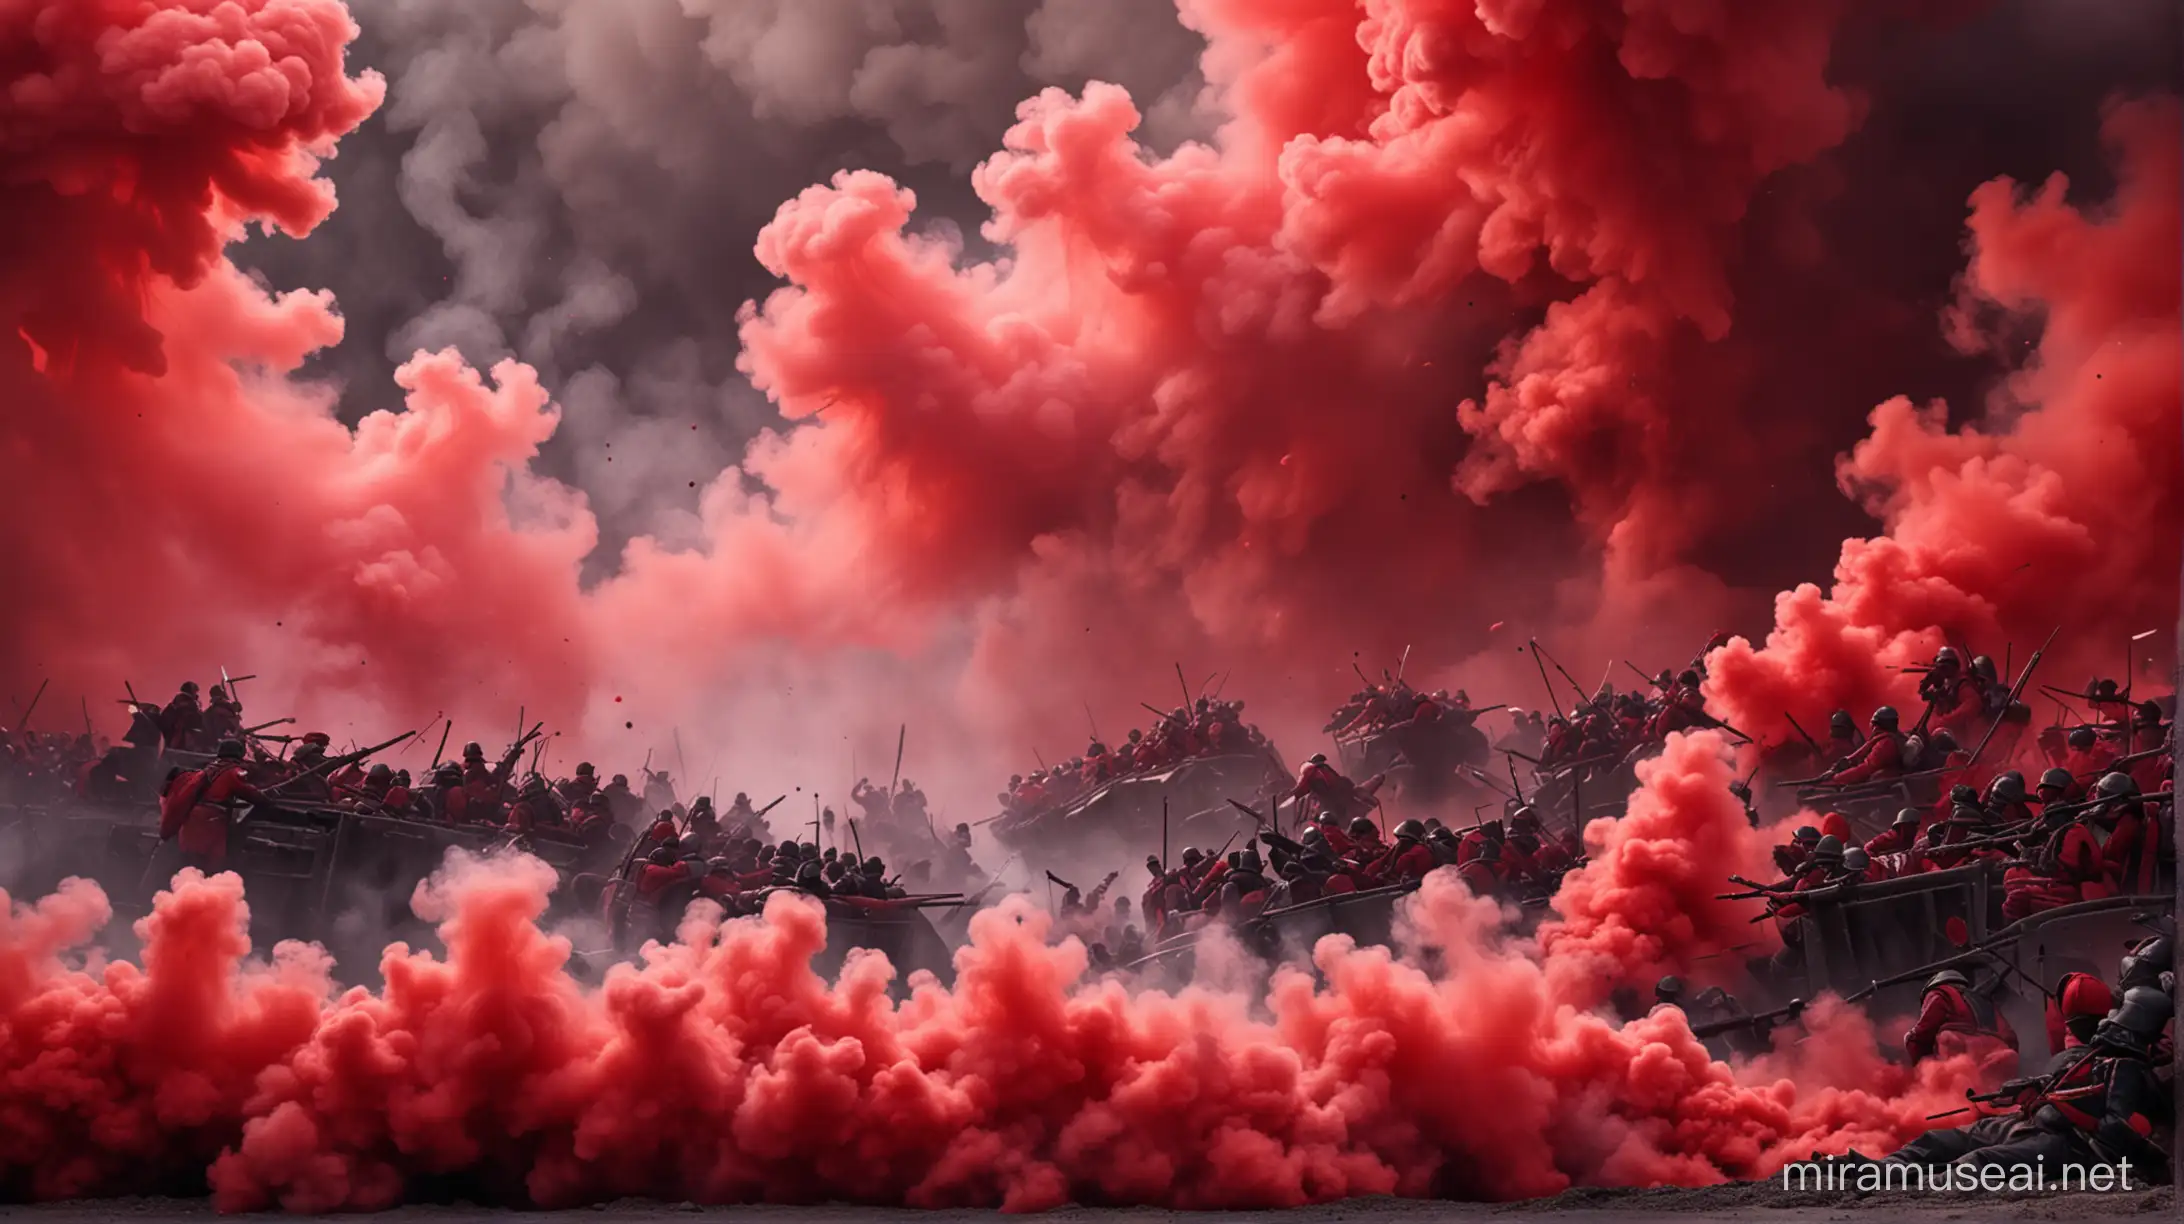 Epic Battle Scene Background with Red and Black Hues